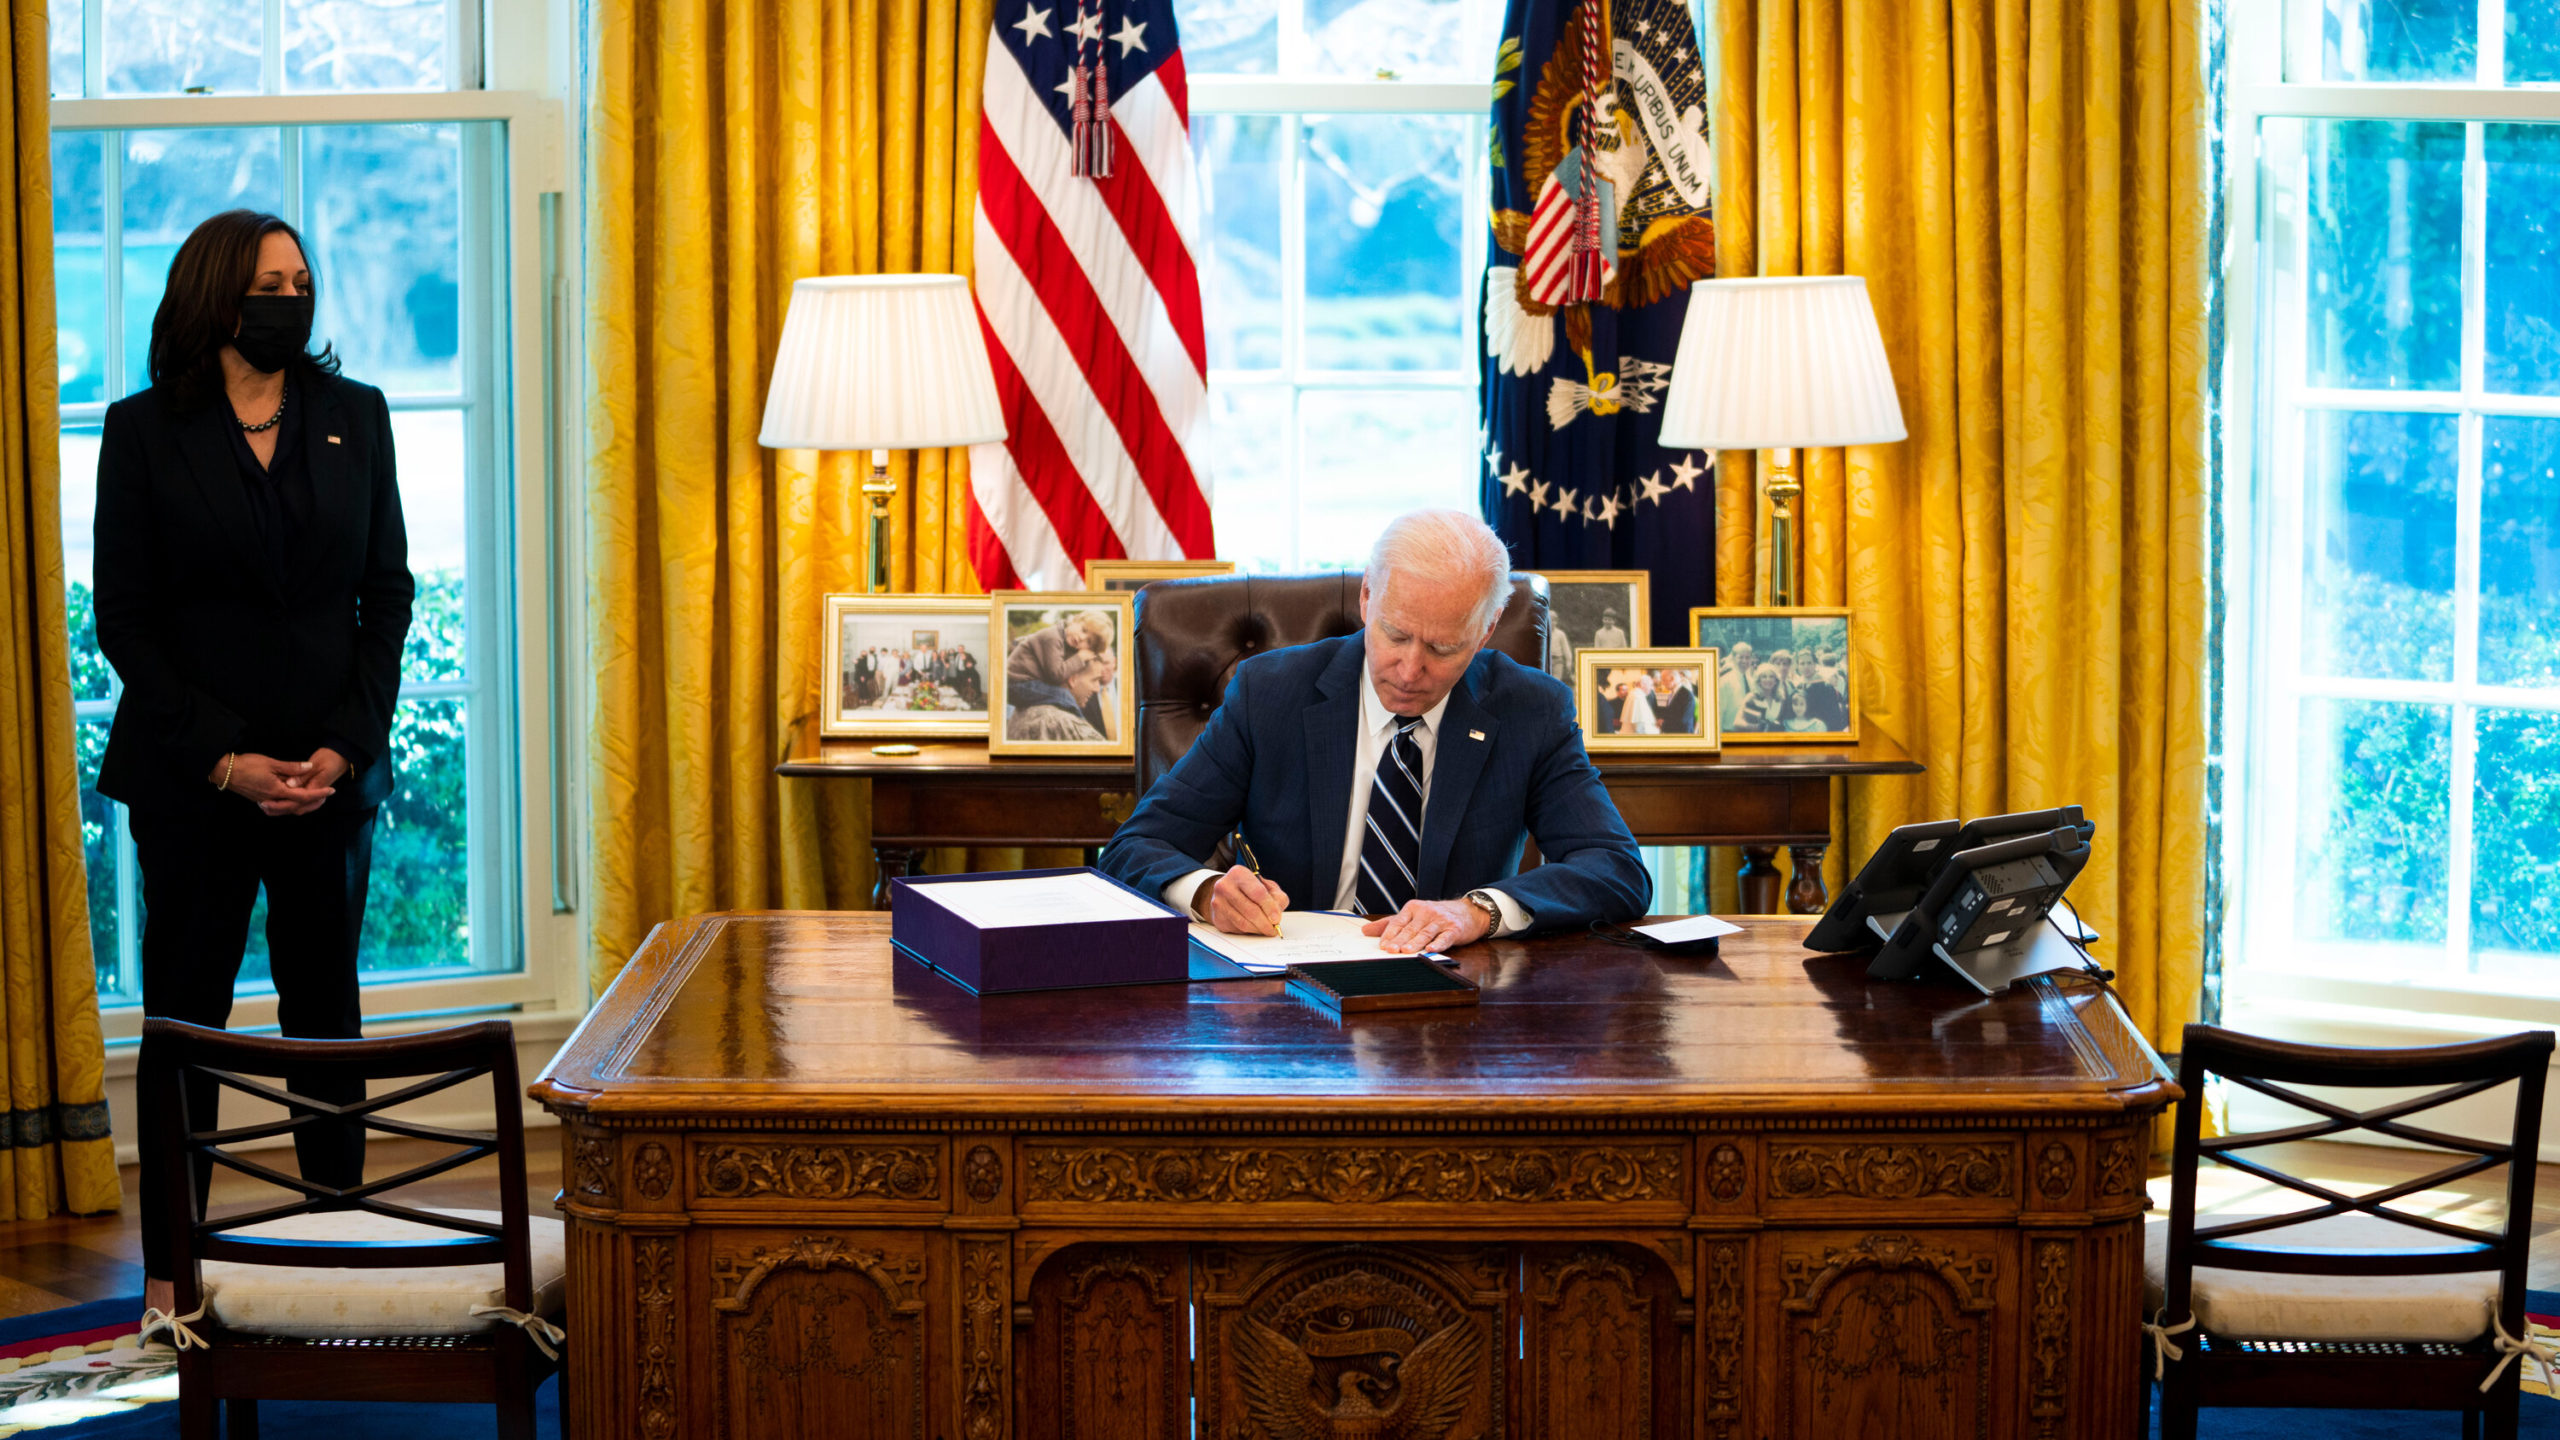 The photo shows President Joe Biden signing the stimulus bill on Thursday, March 11, in the Oval Office, as Vice President Kamala Harris looks on.